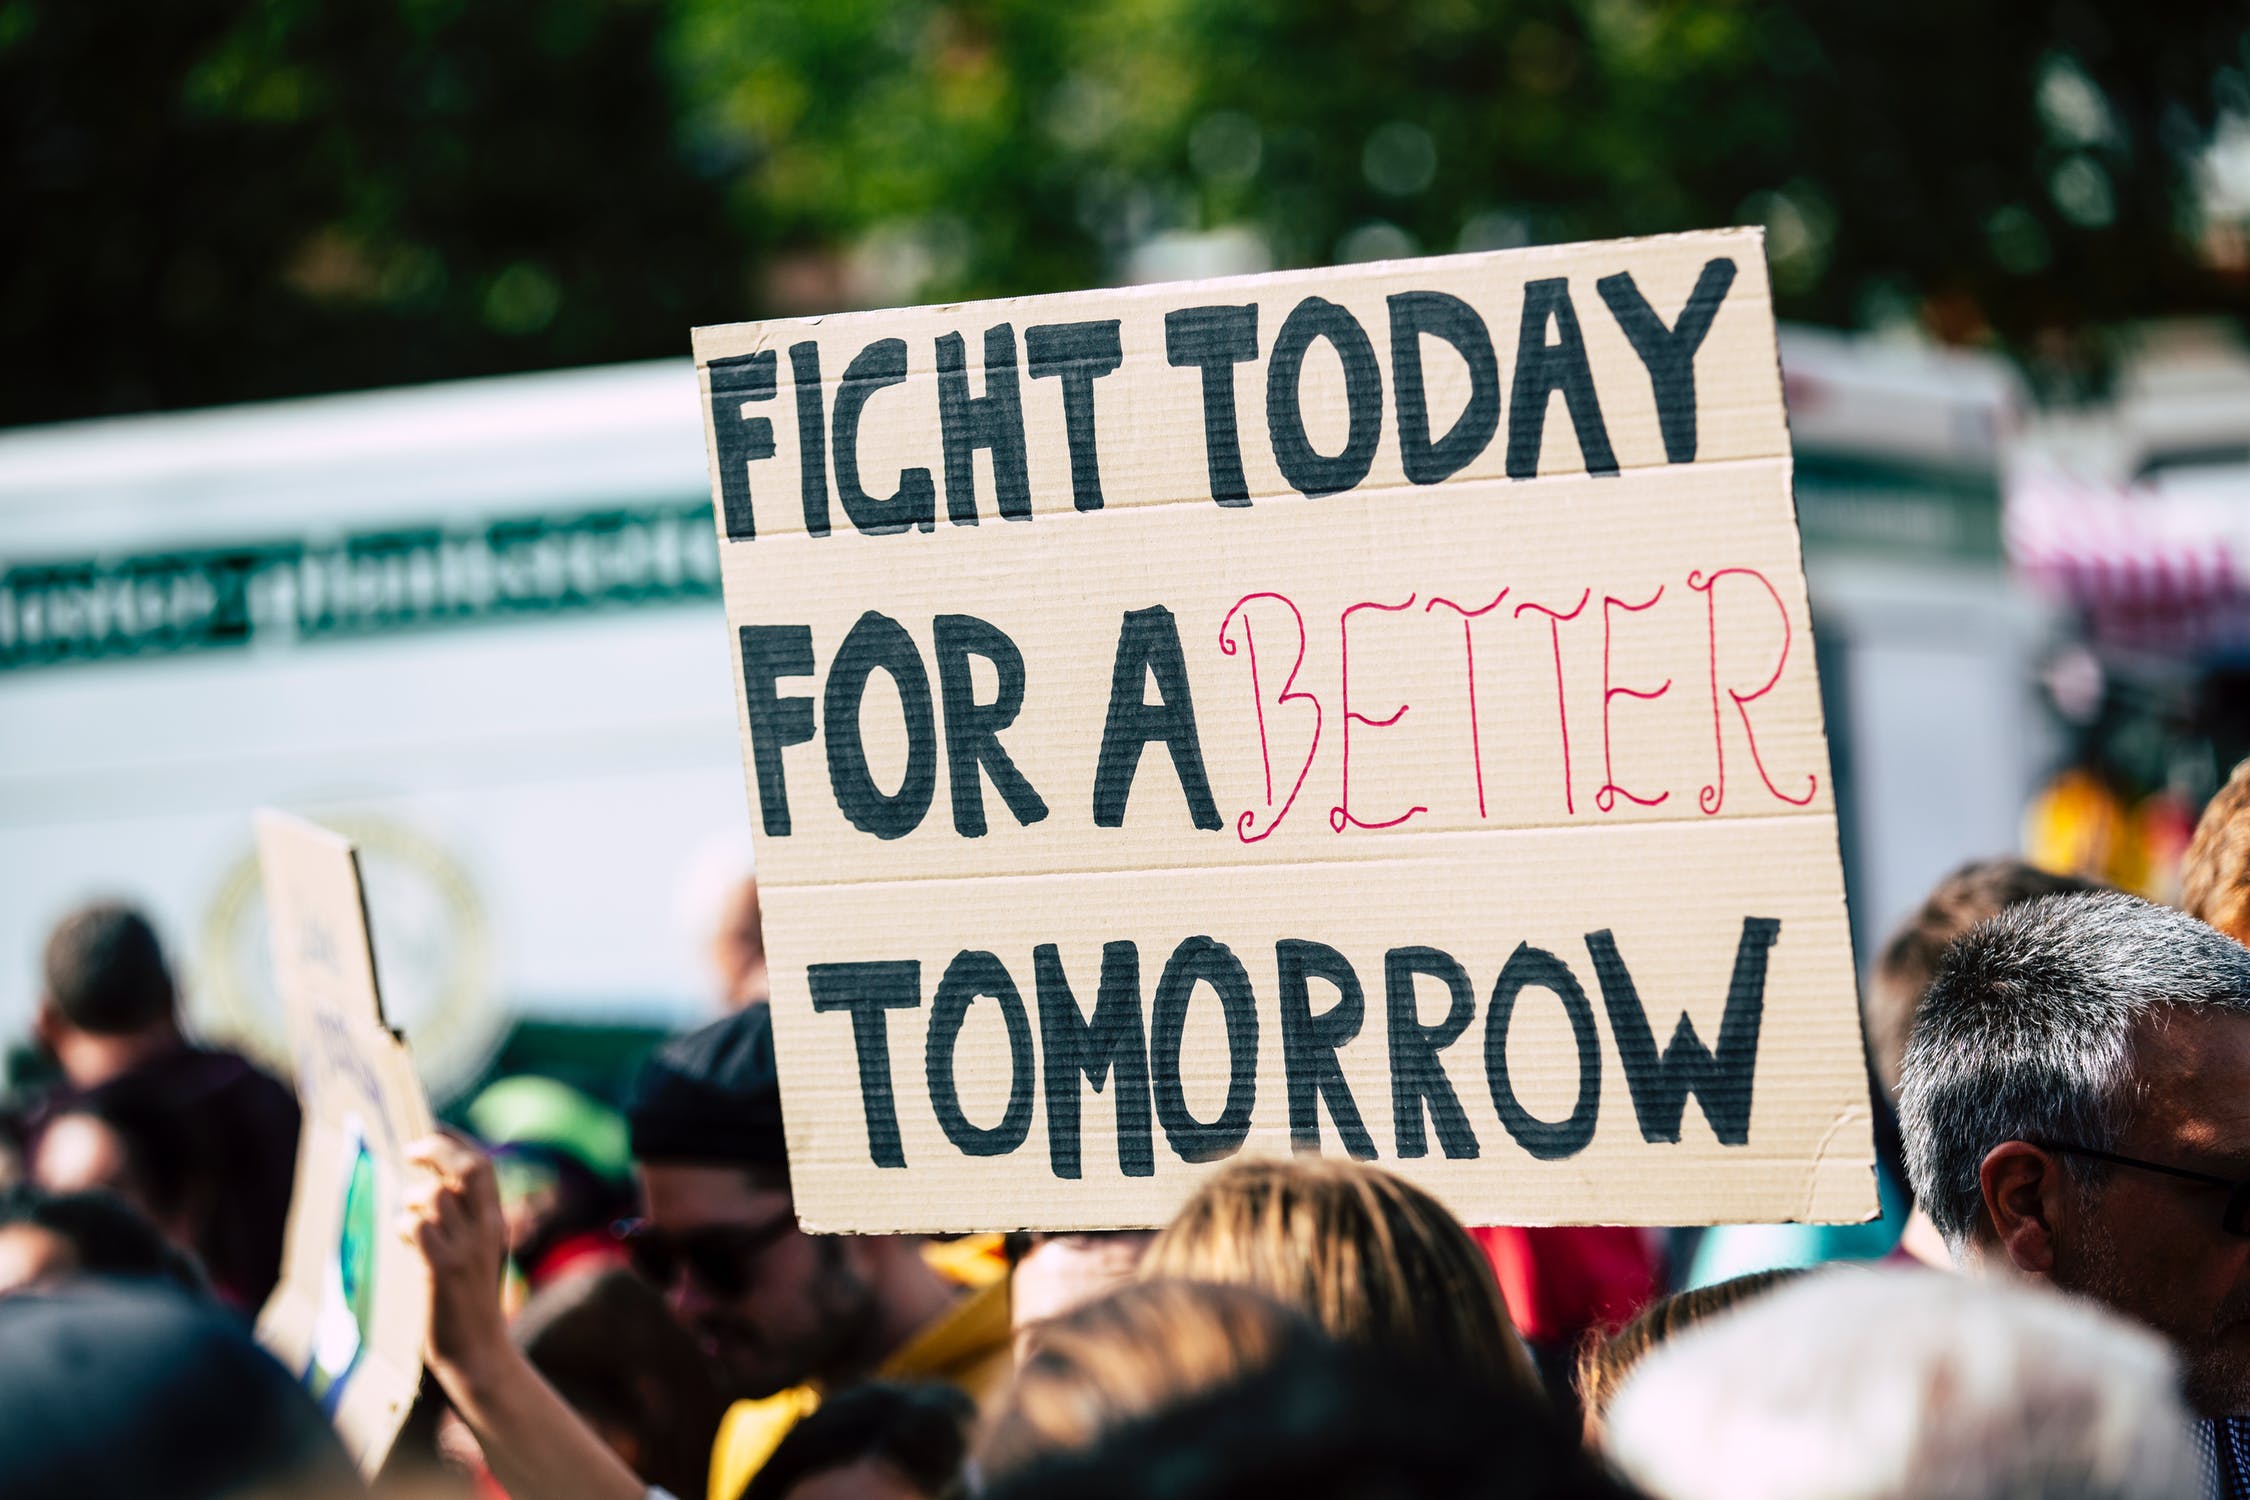 a student in a group holding a sign reading "fight today for a better tomorrow"